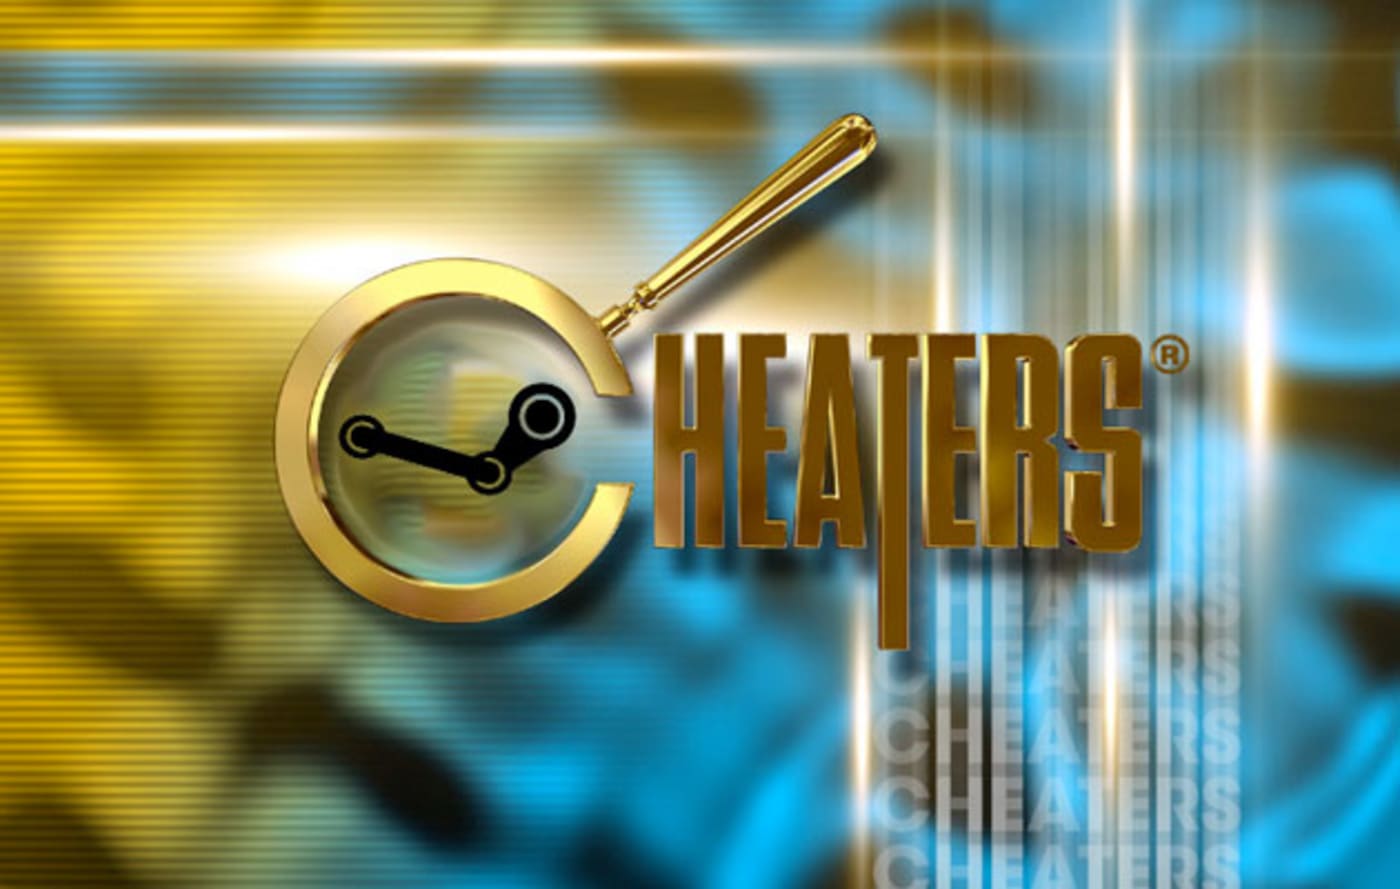 Valve will ban Steam cheaters via their linked phone numbers